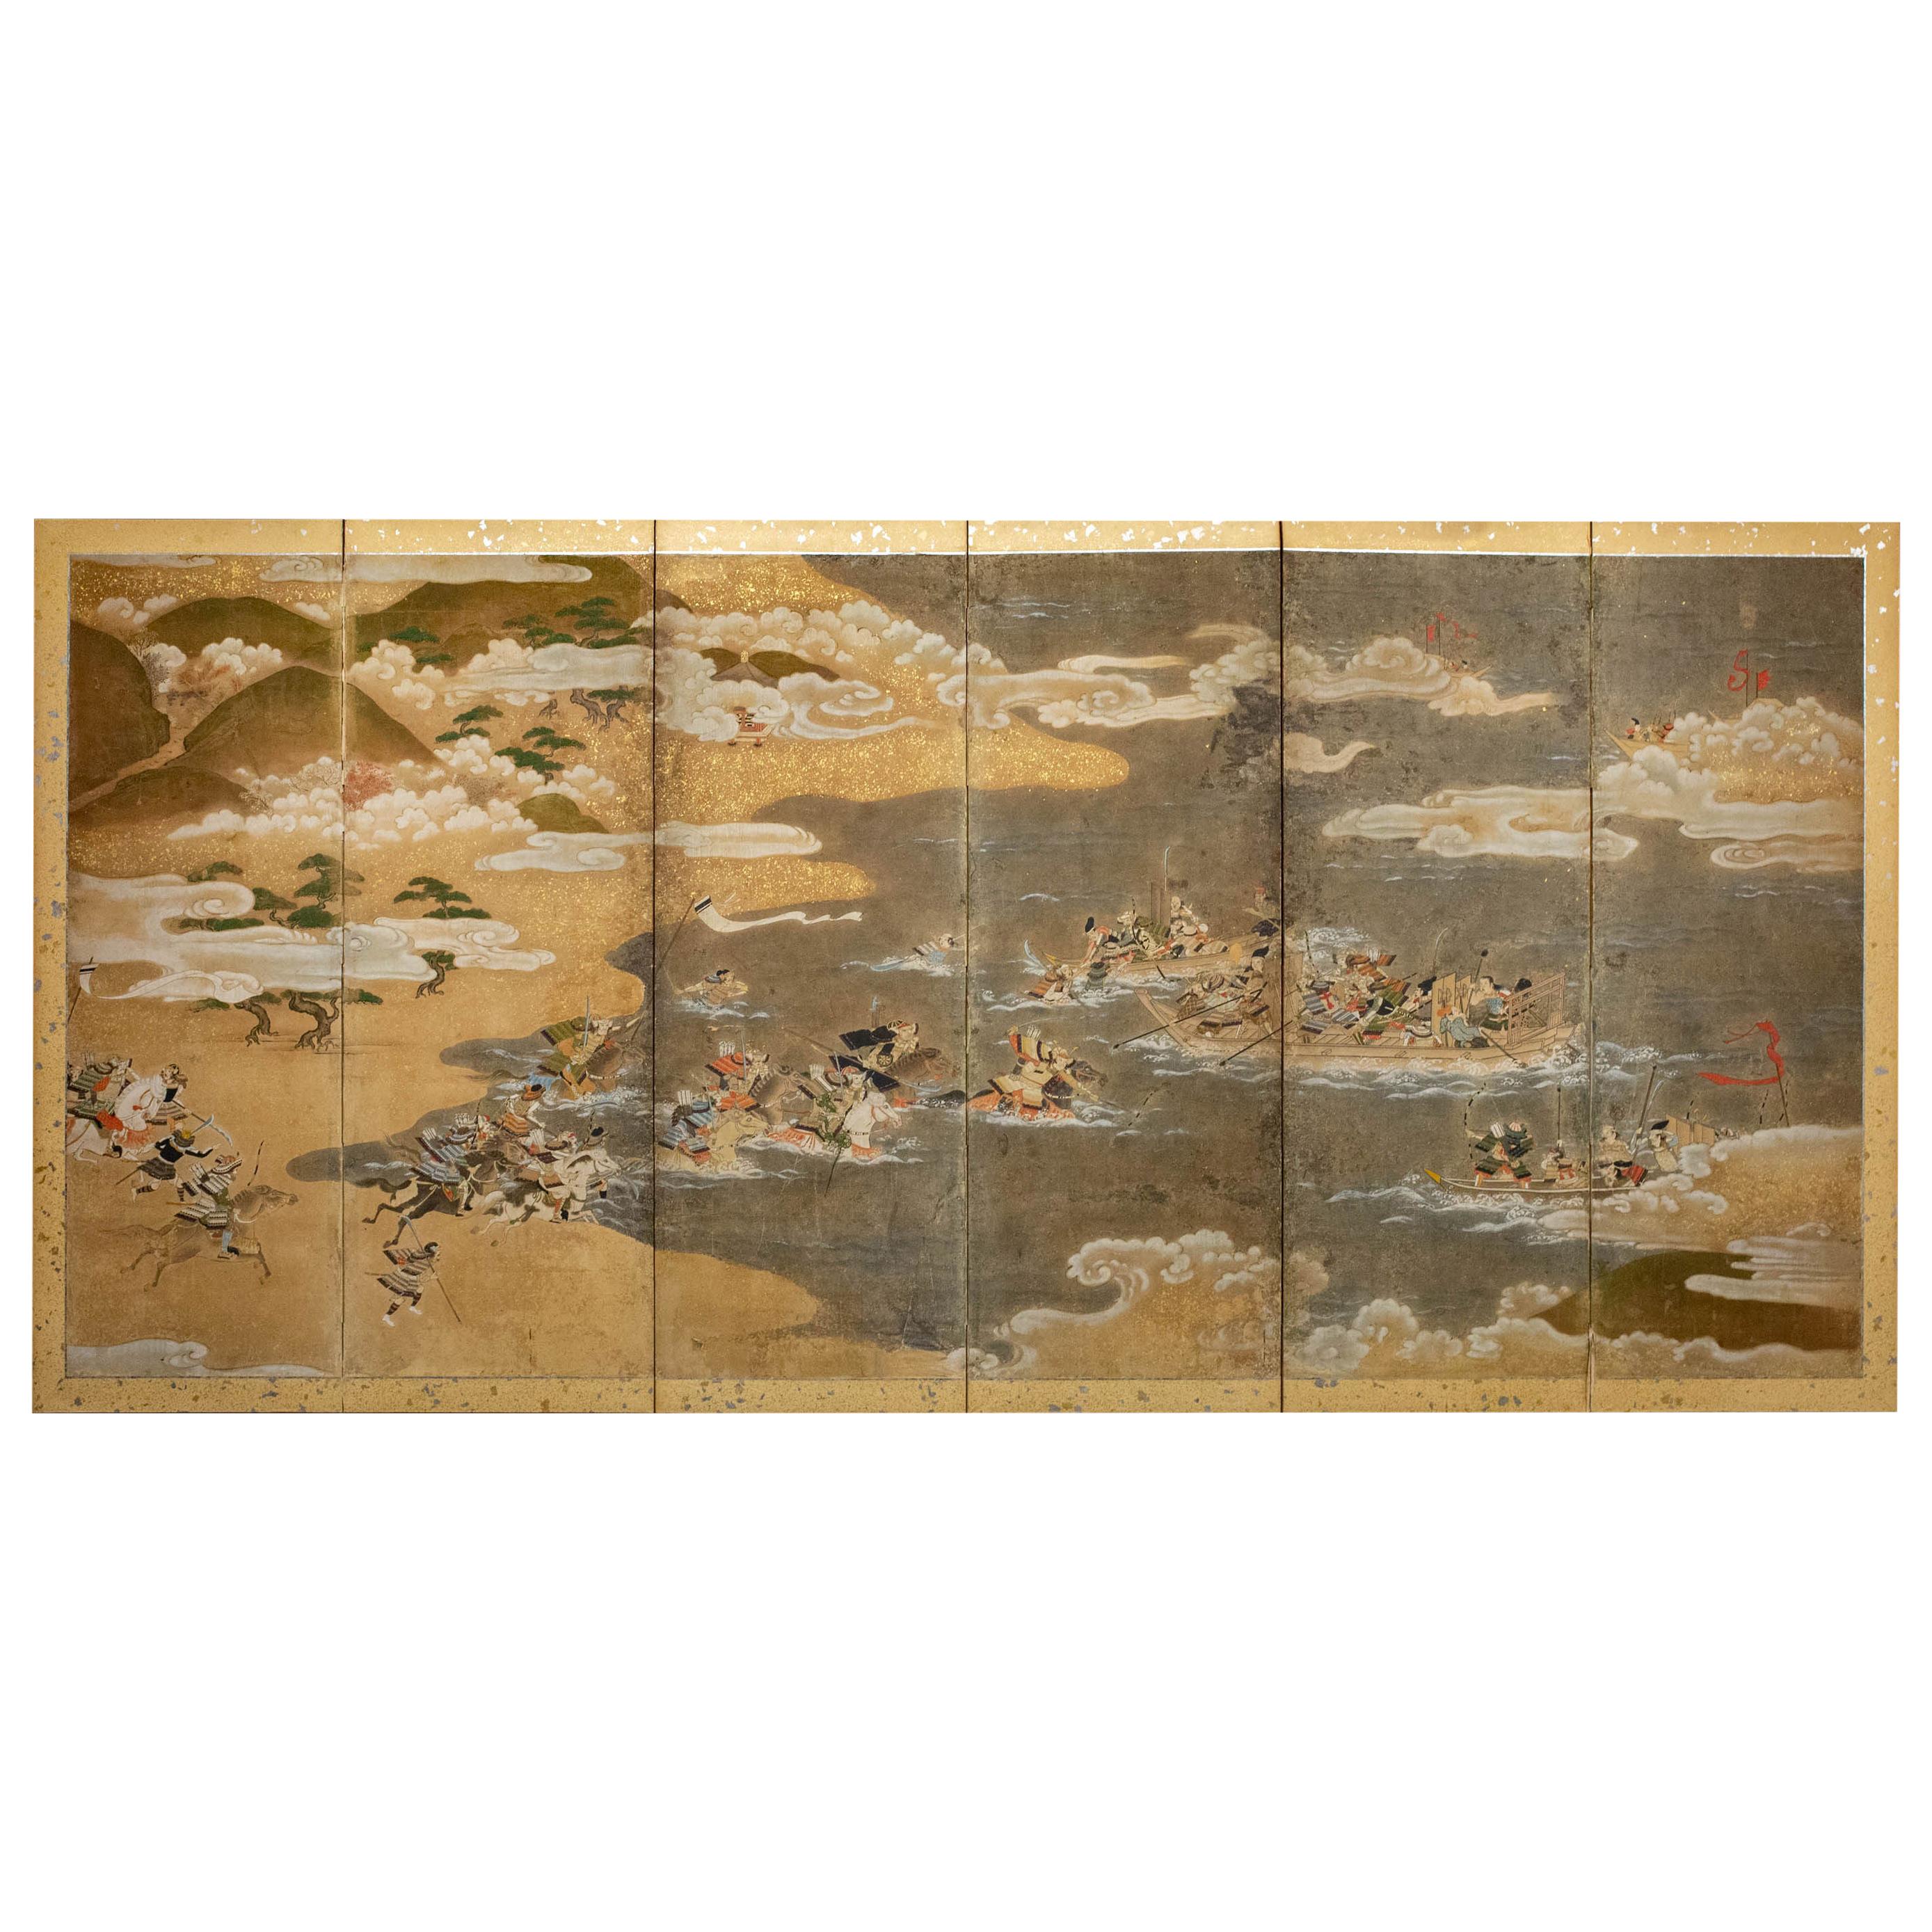 Japanese Six-Panel Screen Tosa School Painting of the Battle of Yashima